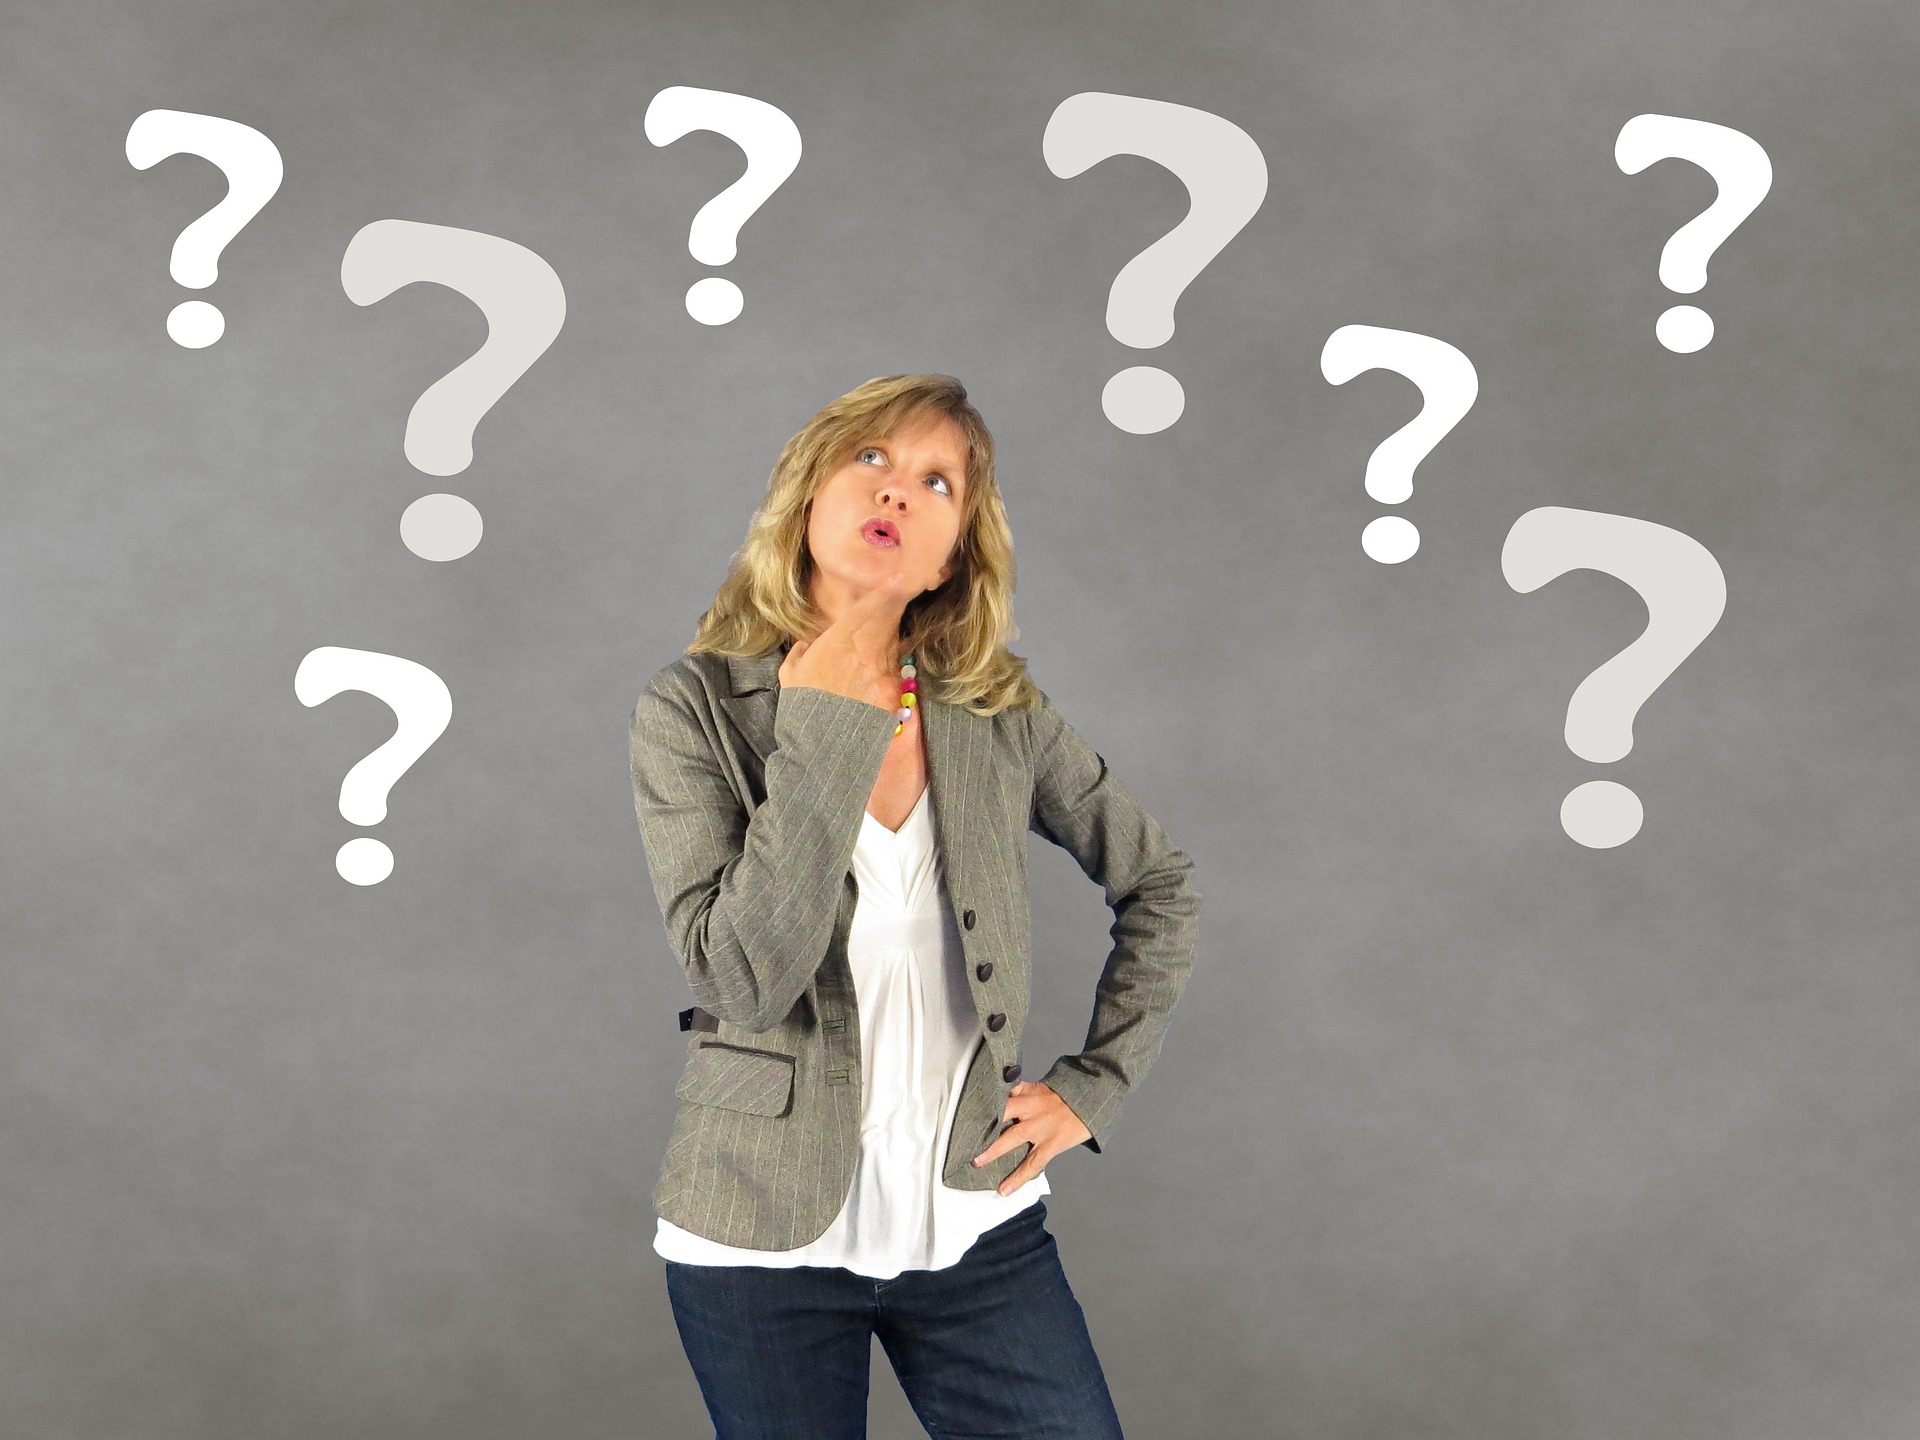 a woman is standing in front of question marks